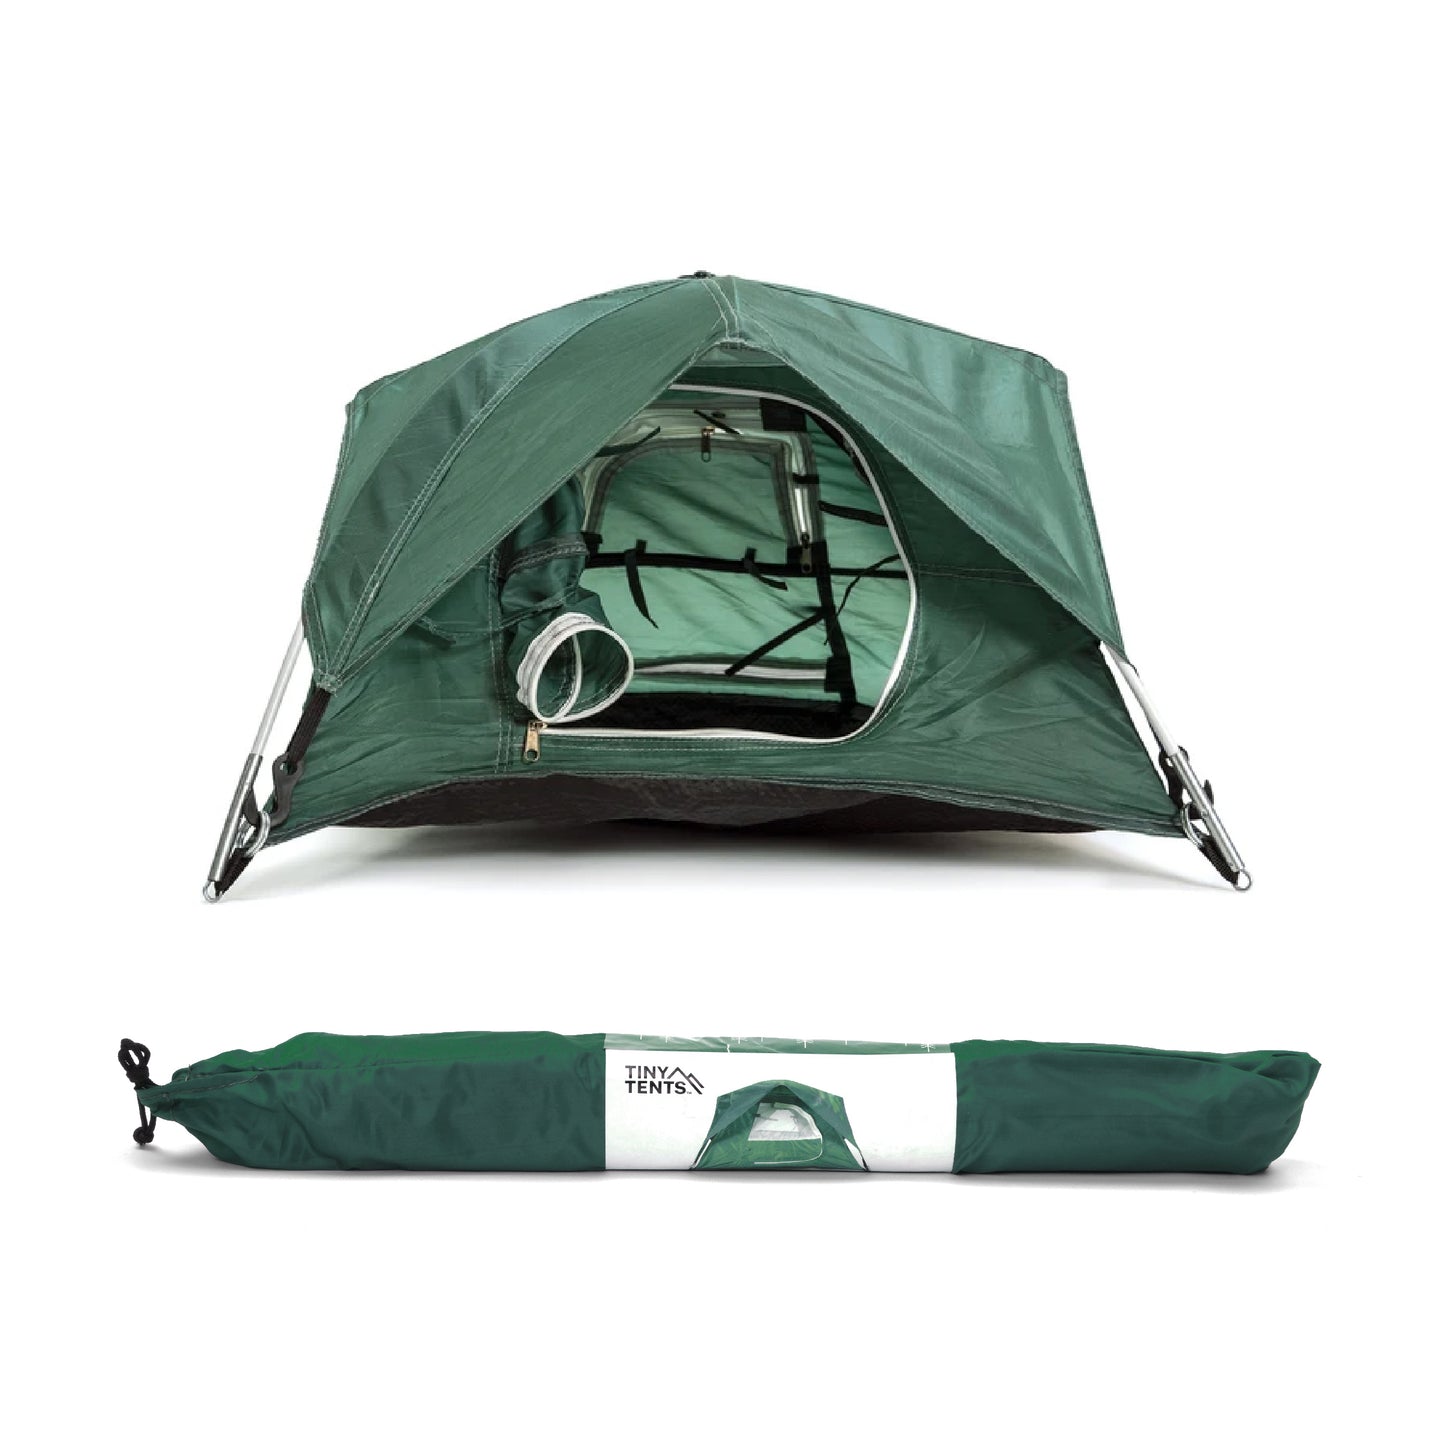 green tiny tent shown in front of packed up tiny tent on a white background